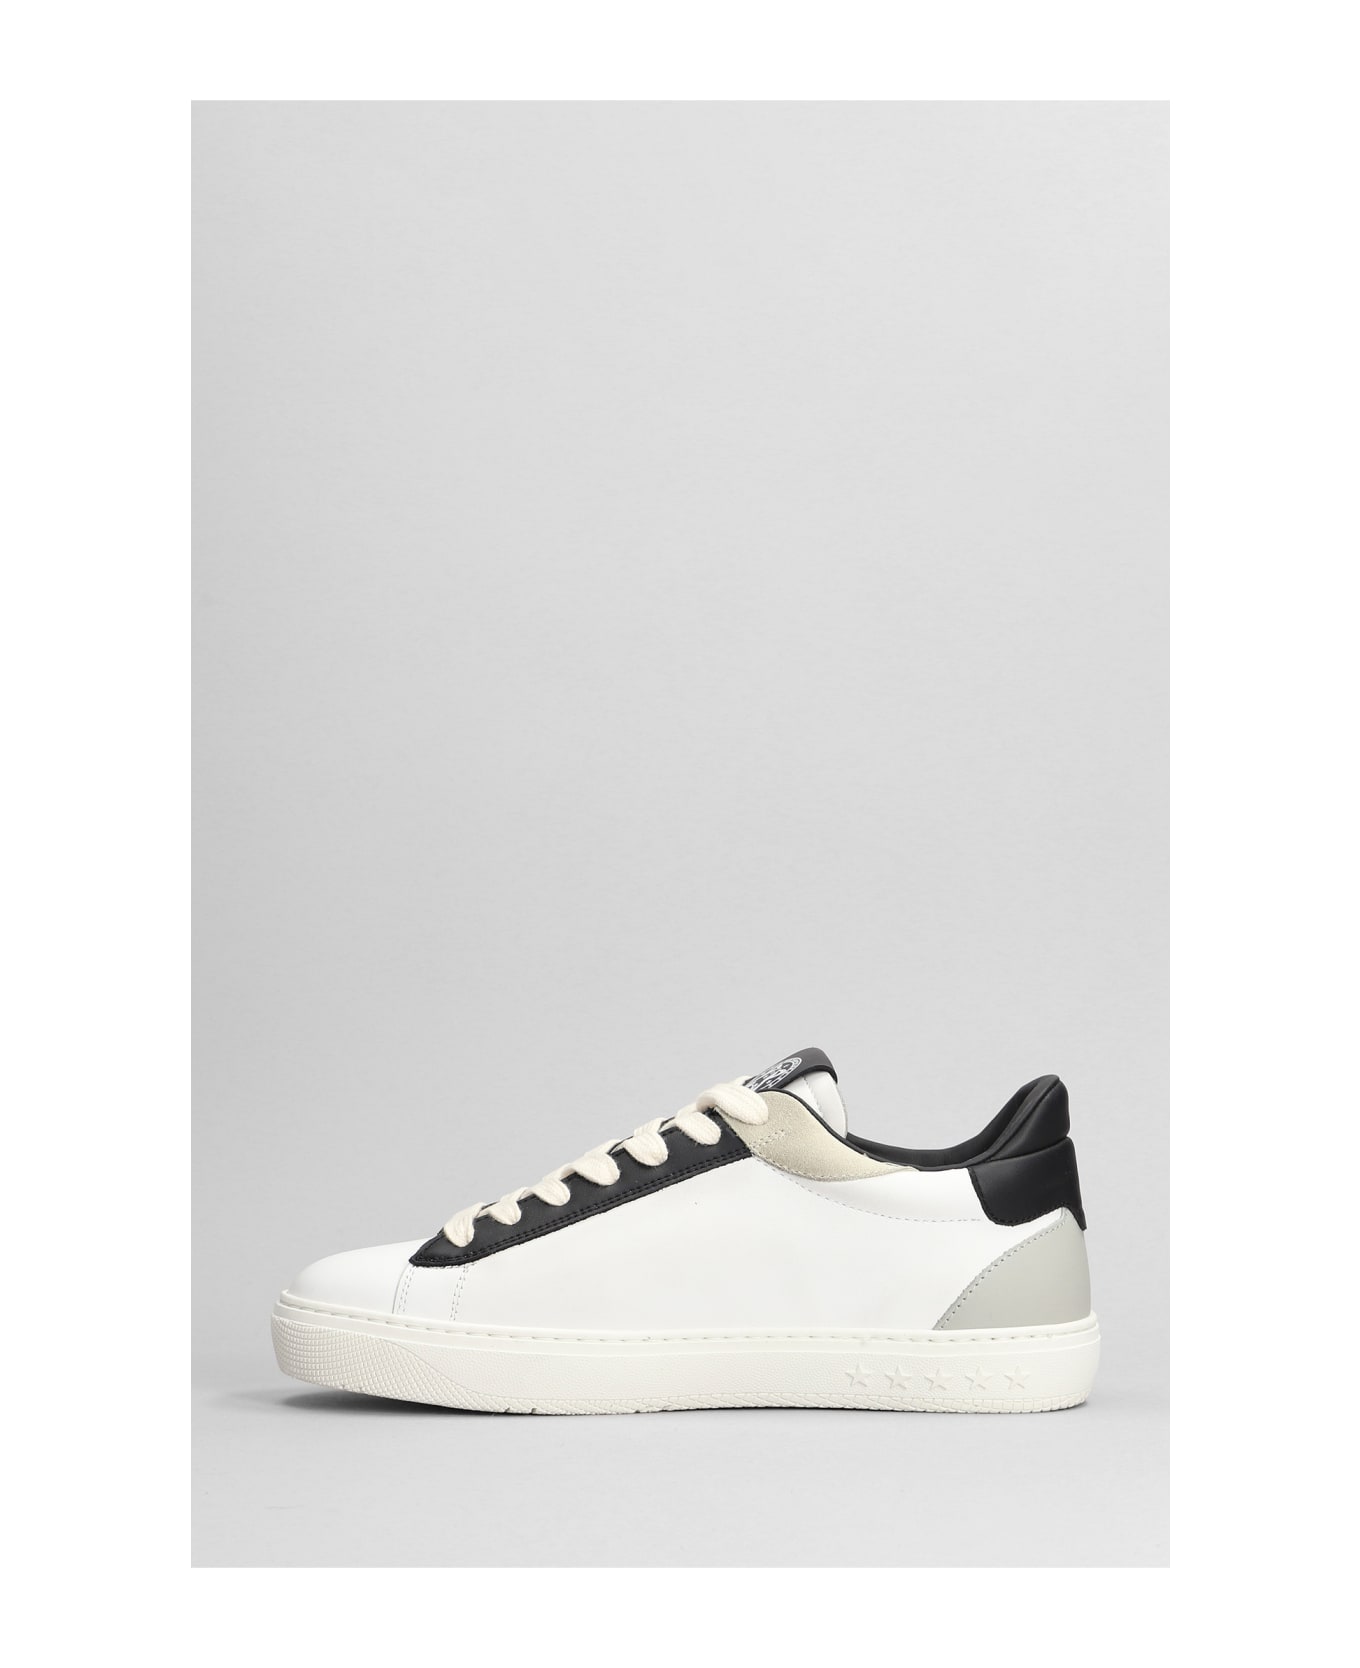 Enterprise Japan Sneakers In White Suede And Leather - White and black スニーカー